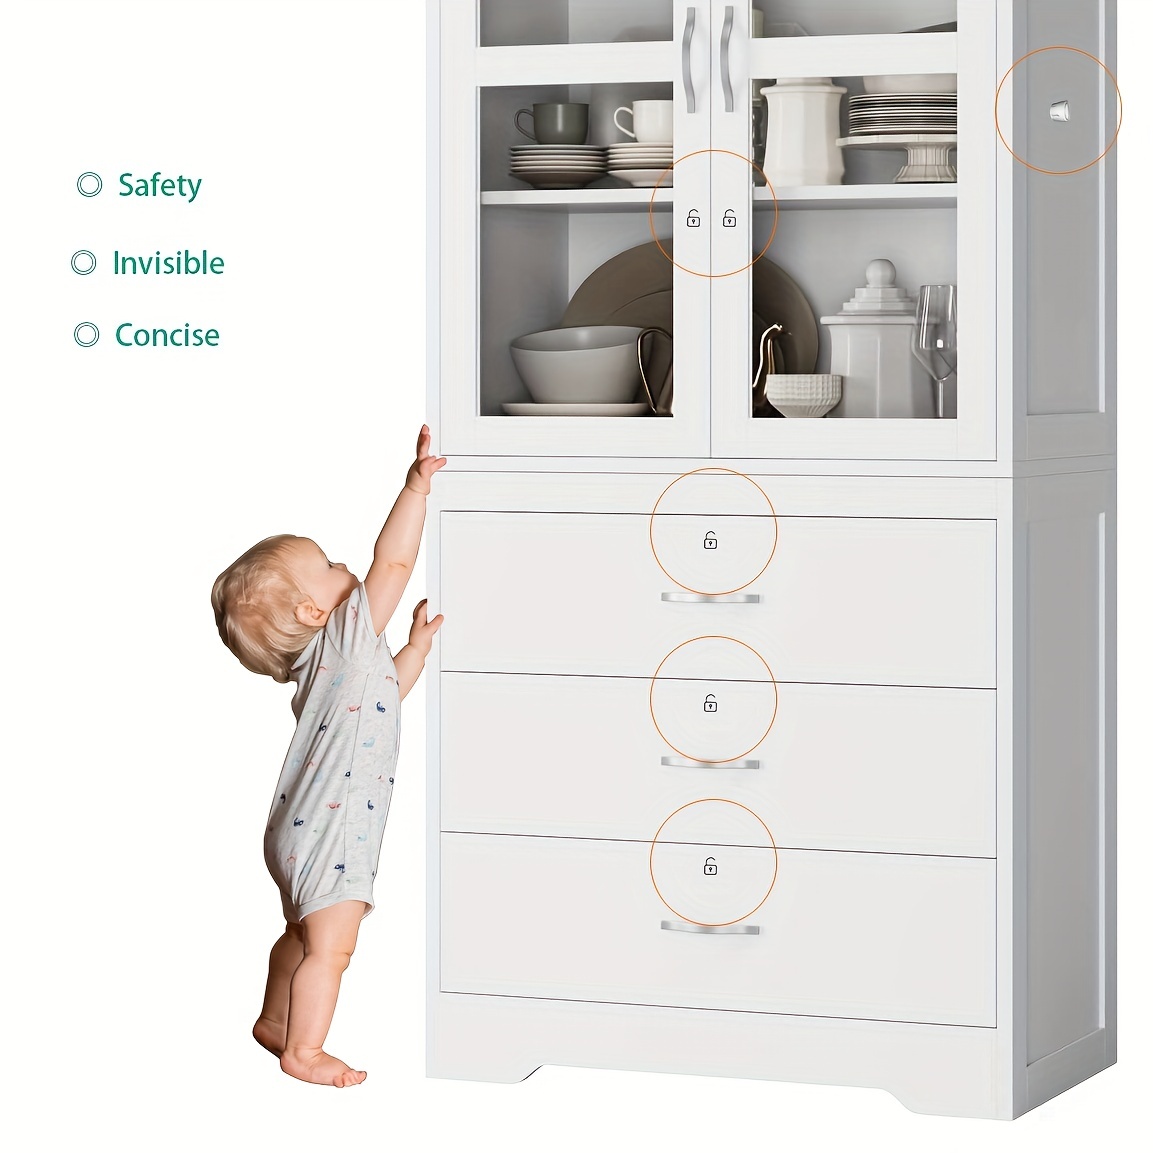 Invisible Child Proof Magnetic Cabinet Locks 